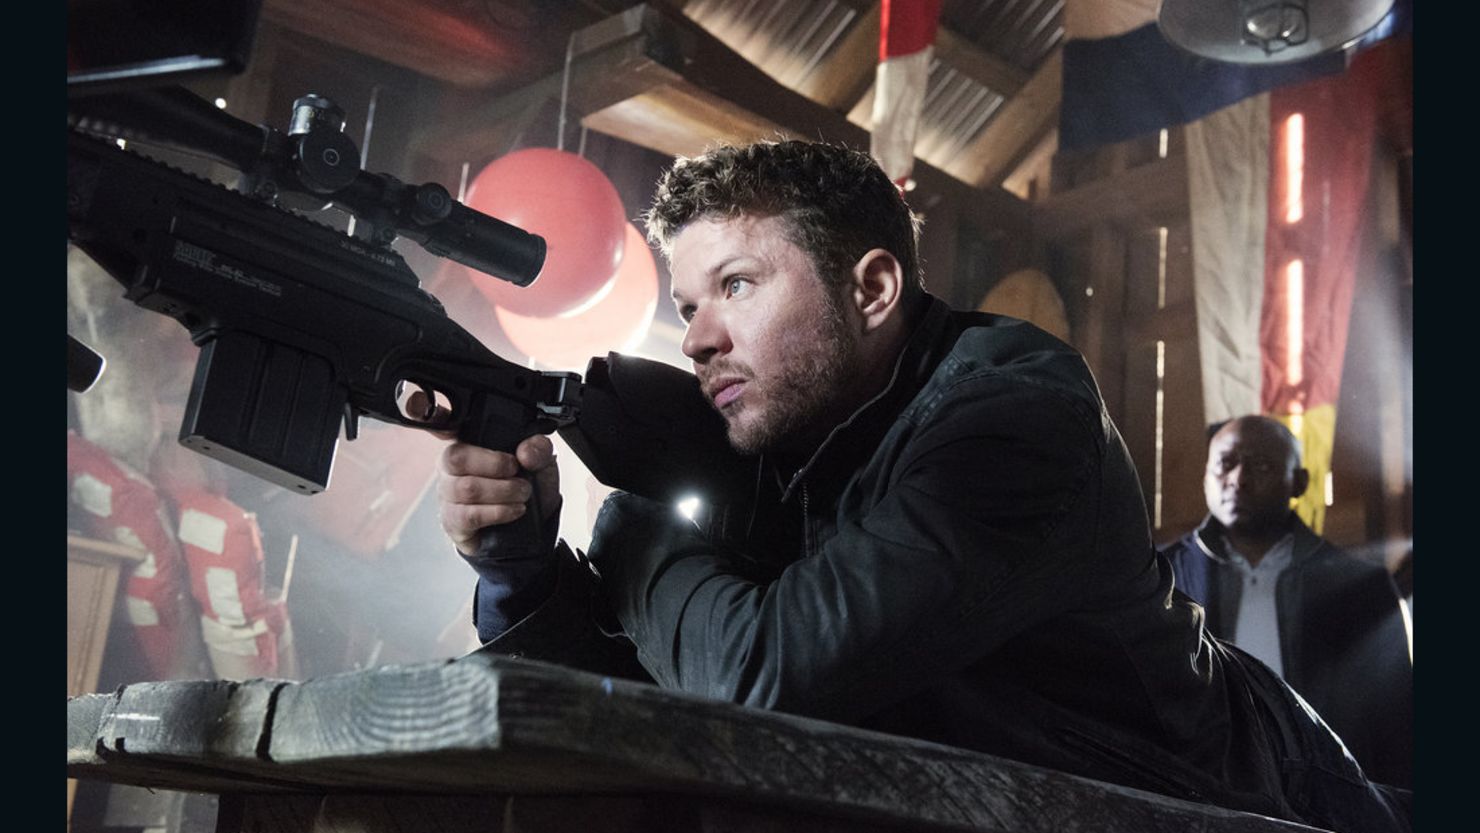 Ryan Phillippe stars in the USA Network series "Shooter."